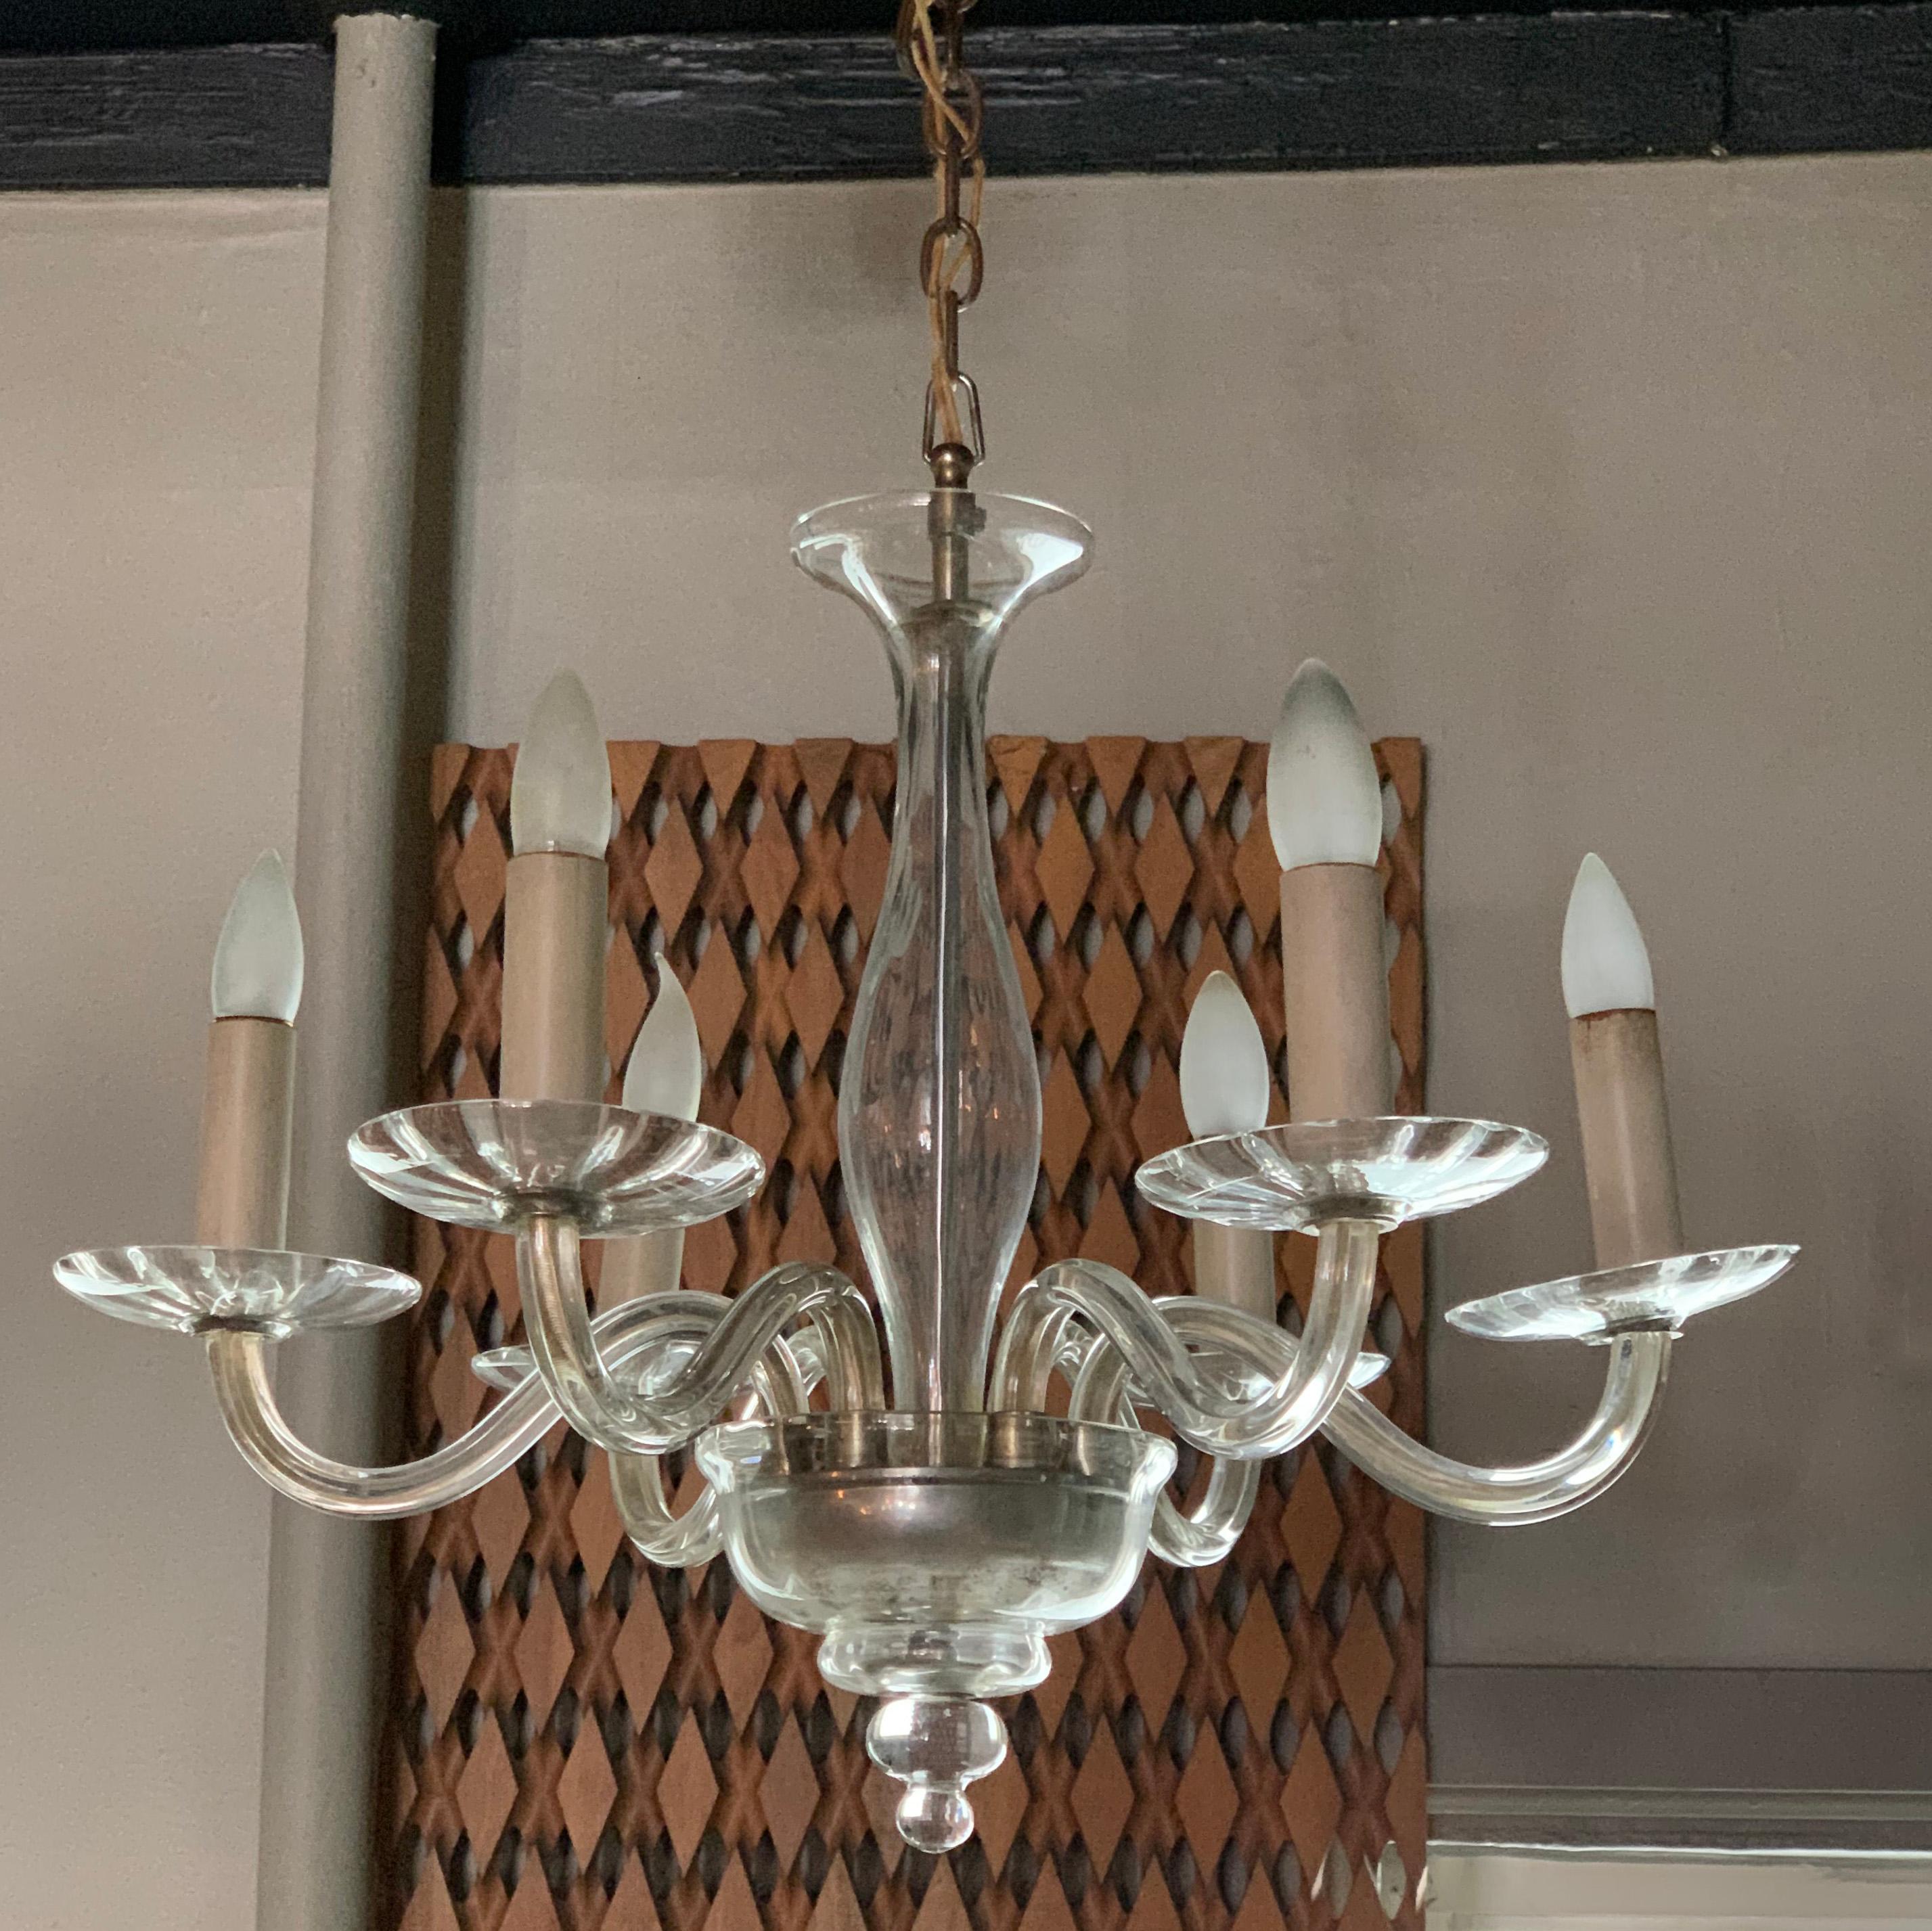 Italian, midcentury, clear Murano glass chandelier features 6 stems that can accept medium socket bulbs up to 40 watts each. The chandelier hangs with 24 inches of chain bringing it to approx 44 inches extended.